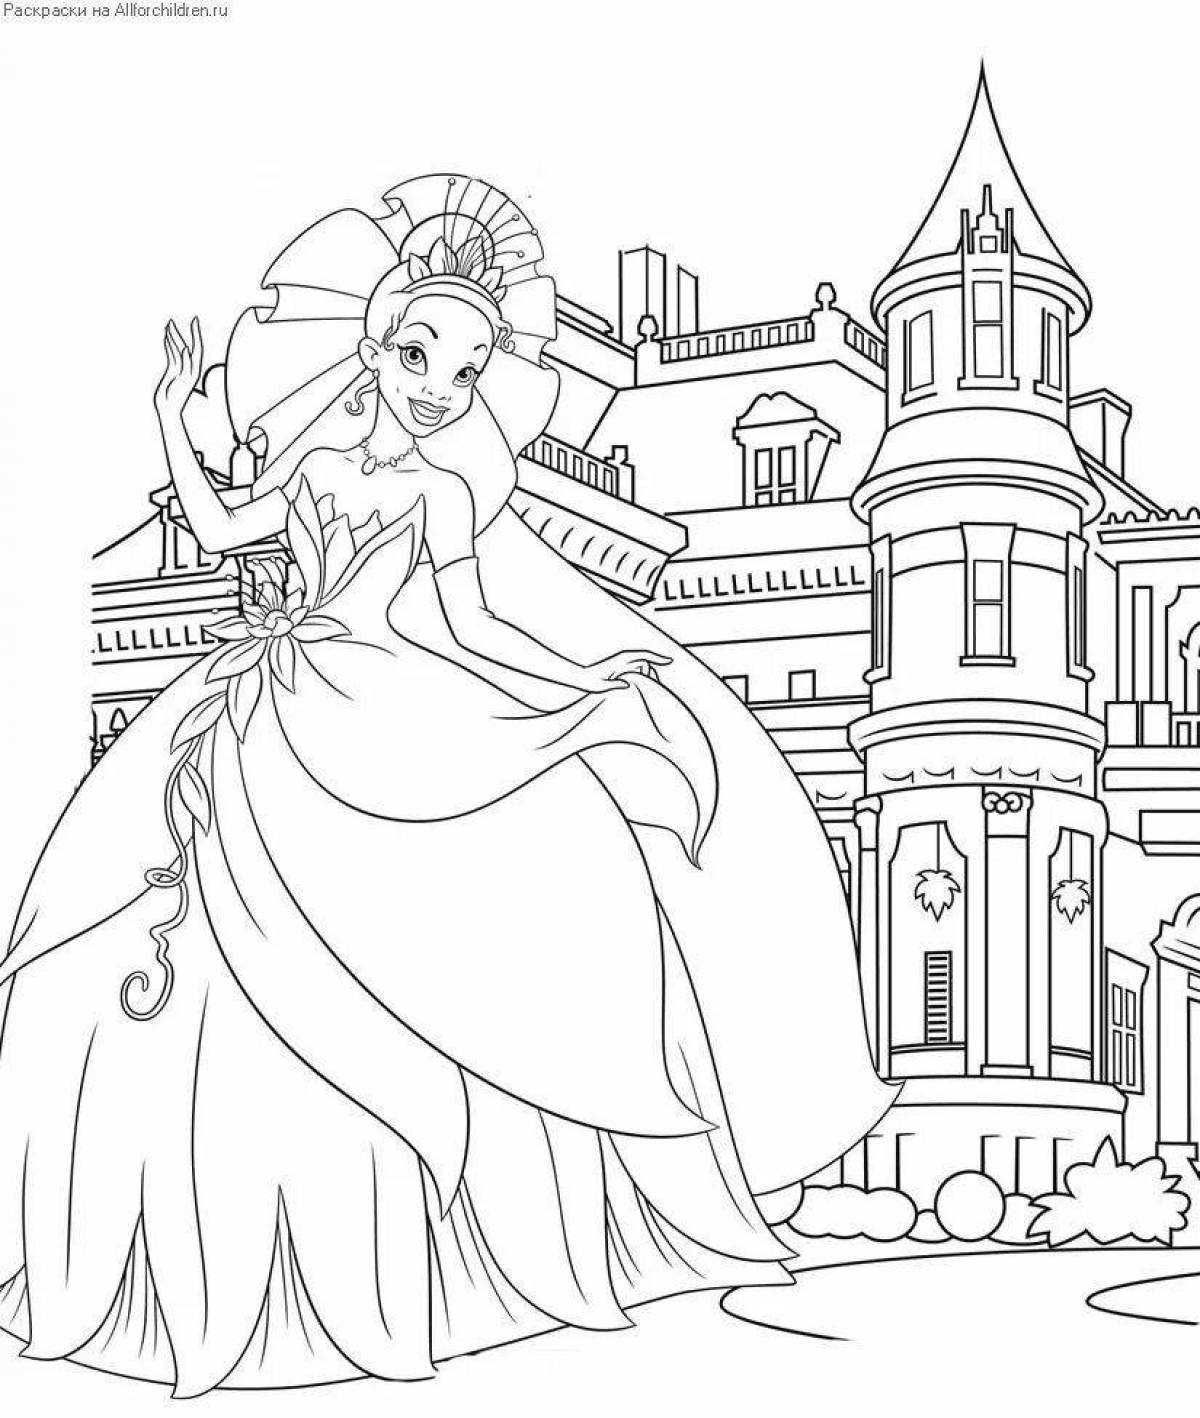 Coloring fairytale castles for girls